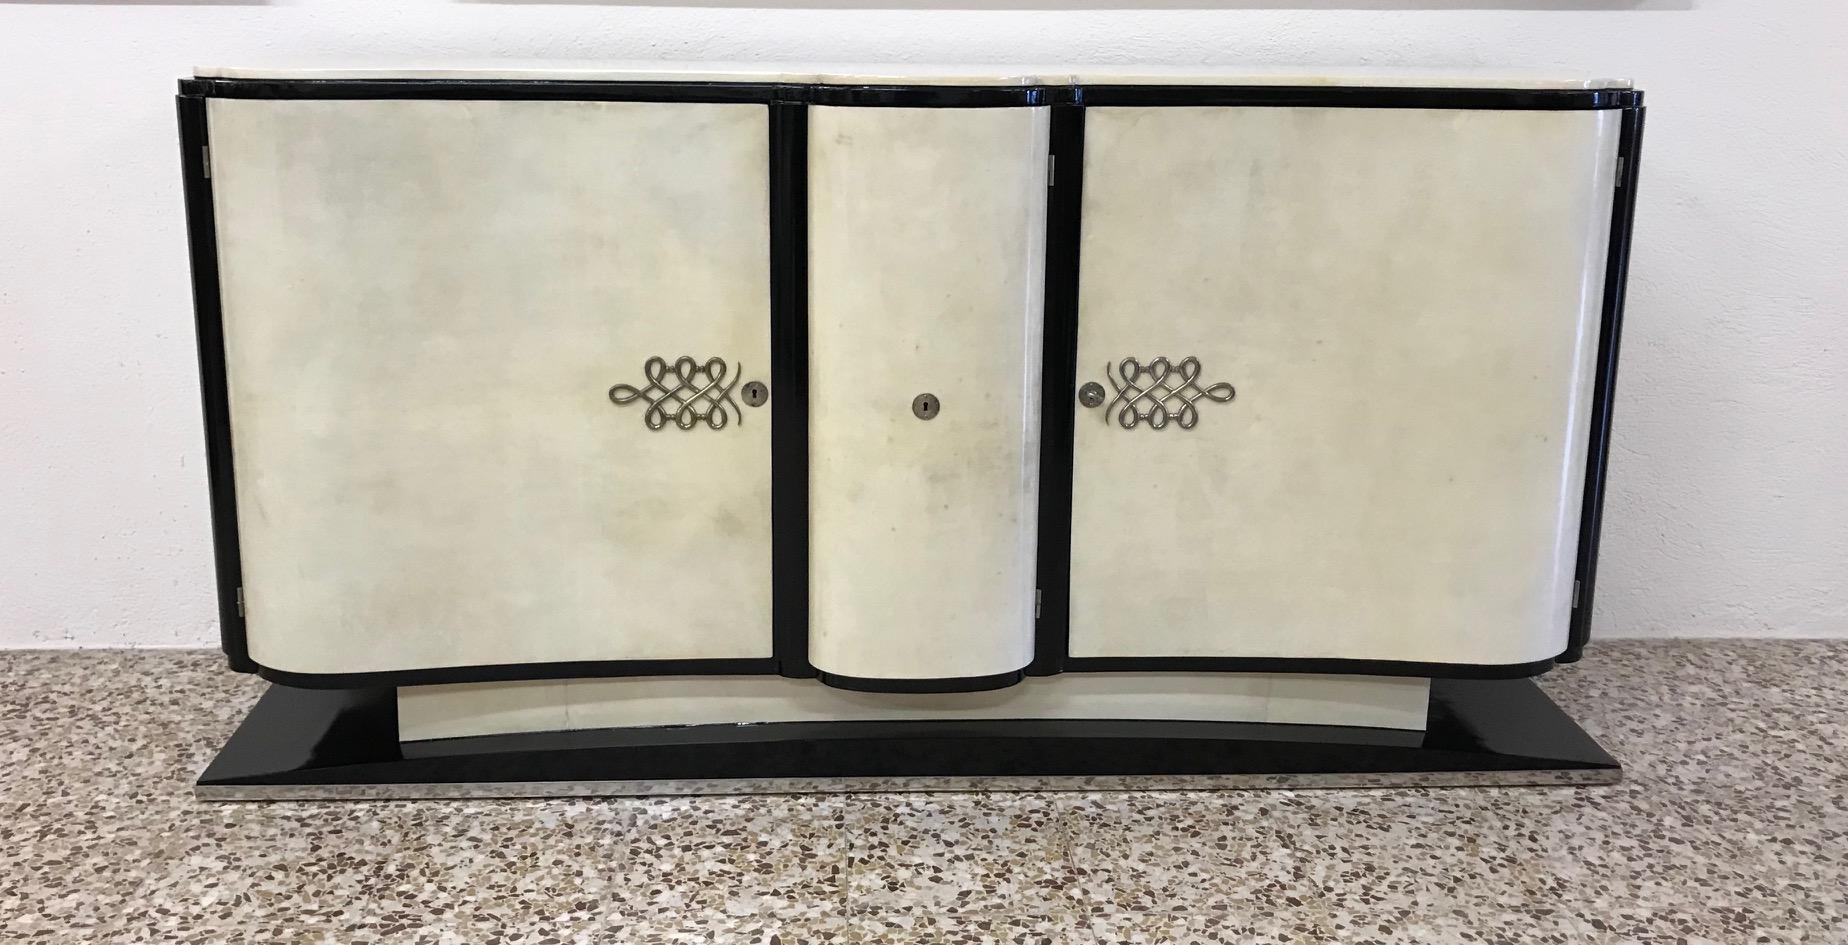 This magnificent Art Deco sideboard was produced in France in the 1930s.
Its majestic lines are embellished with fine parchment.
The edges are ebonized while the decorations on the doors are in chromed metal like the profile on the base.
The very